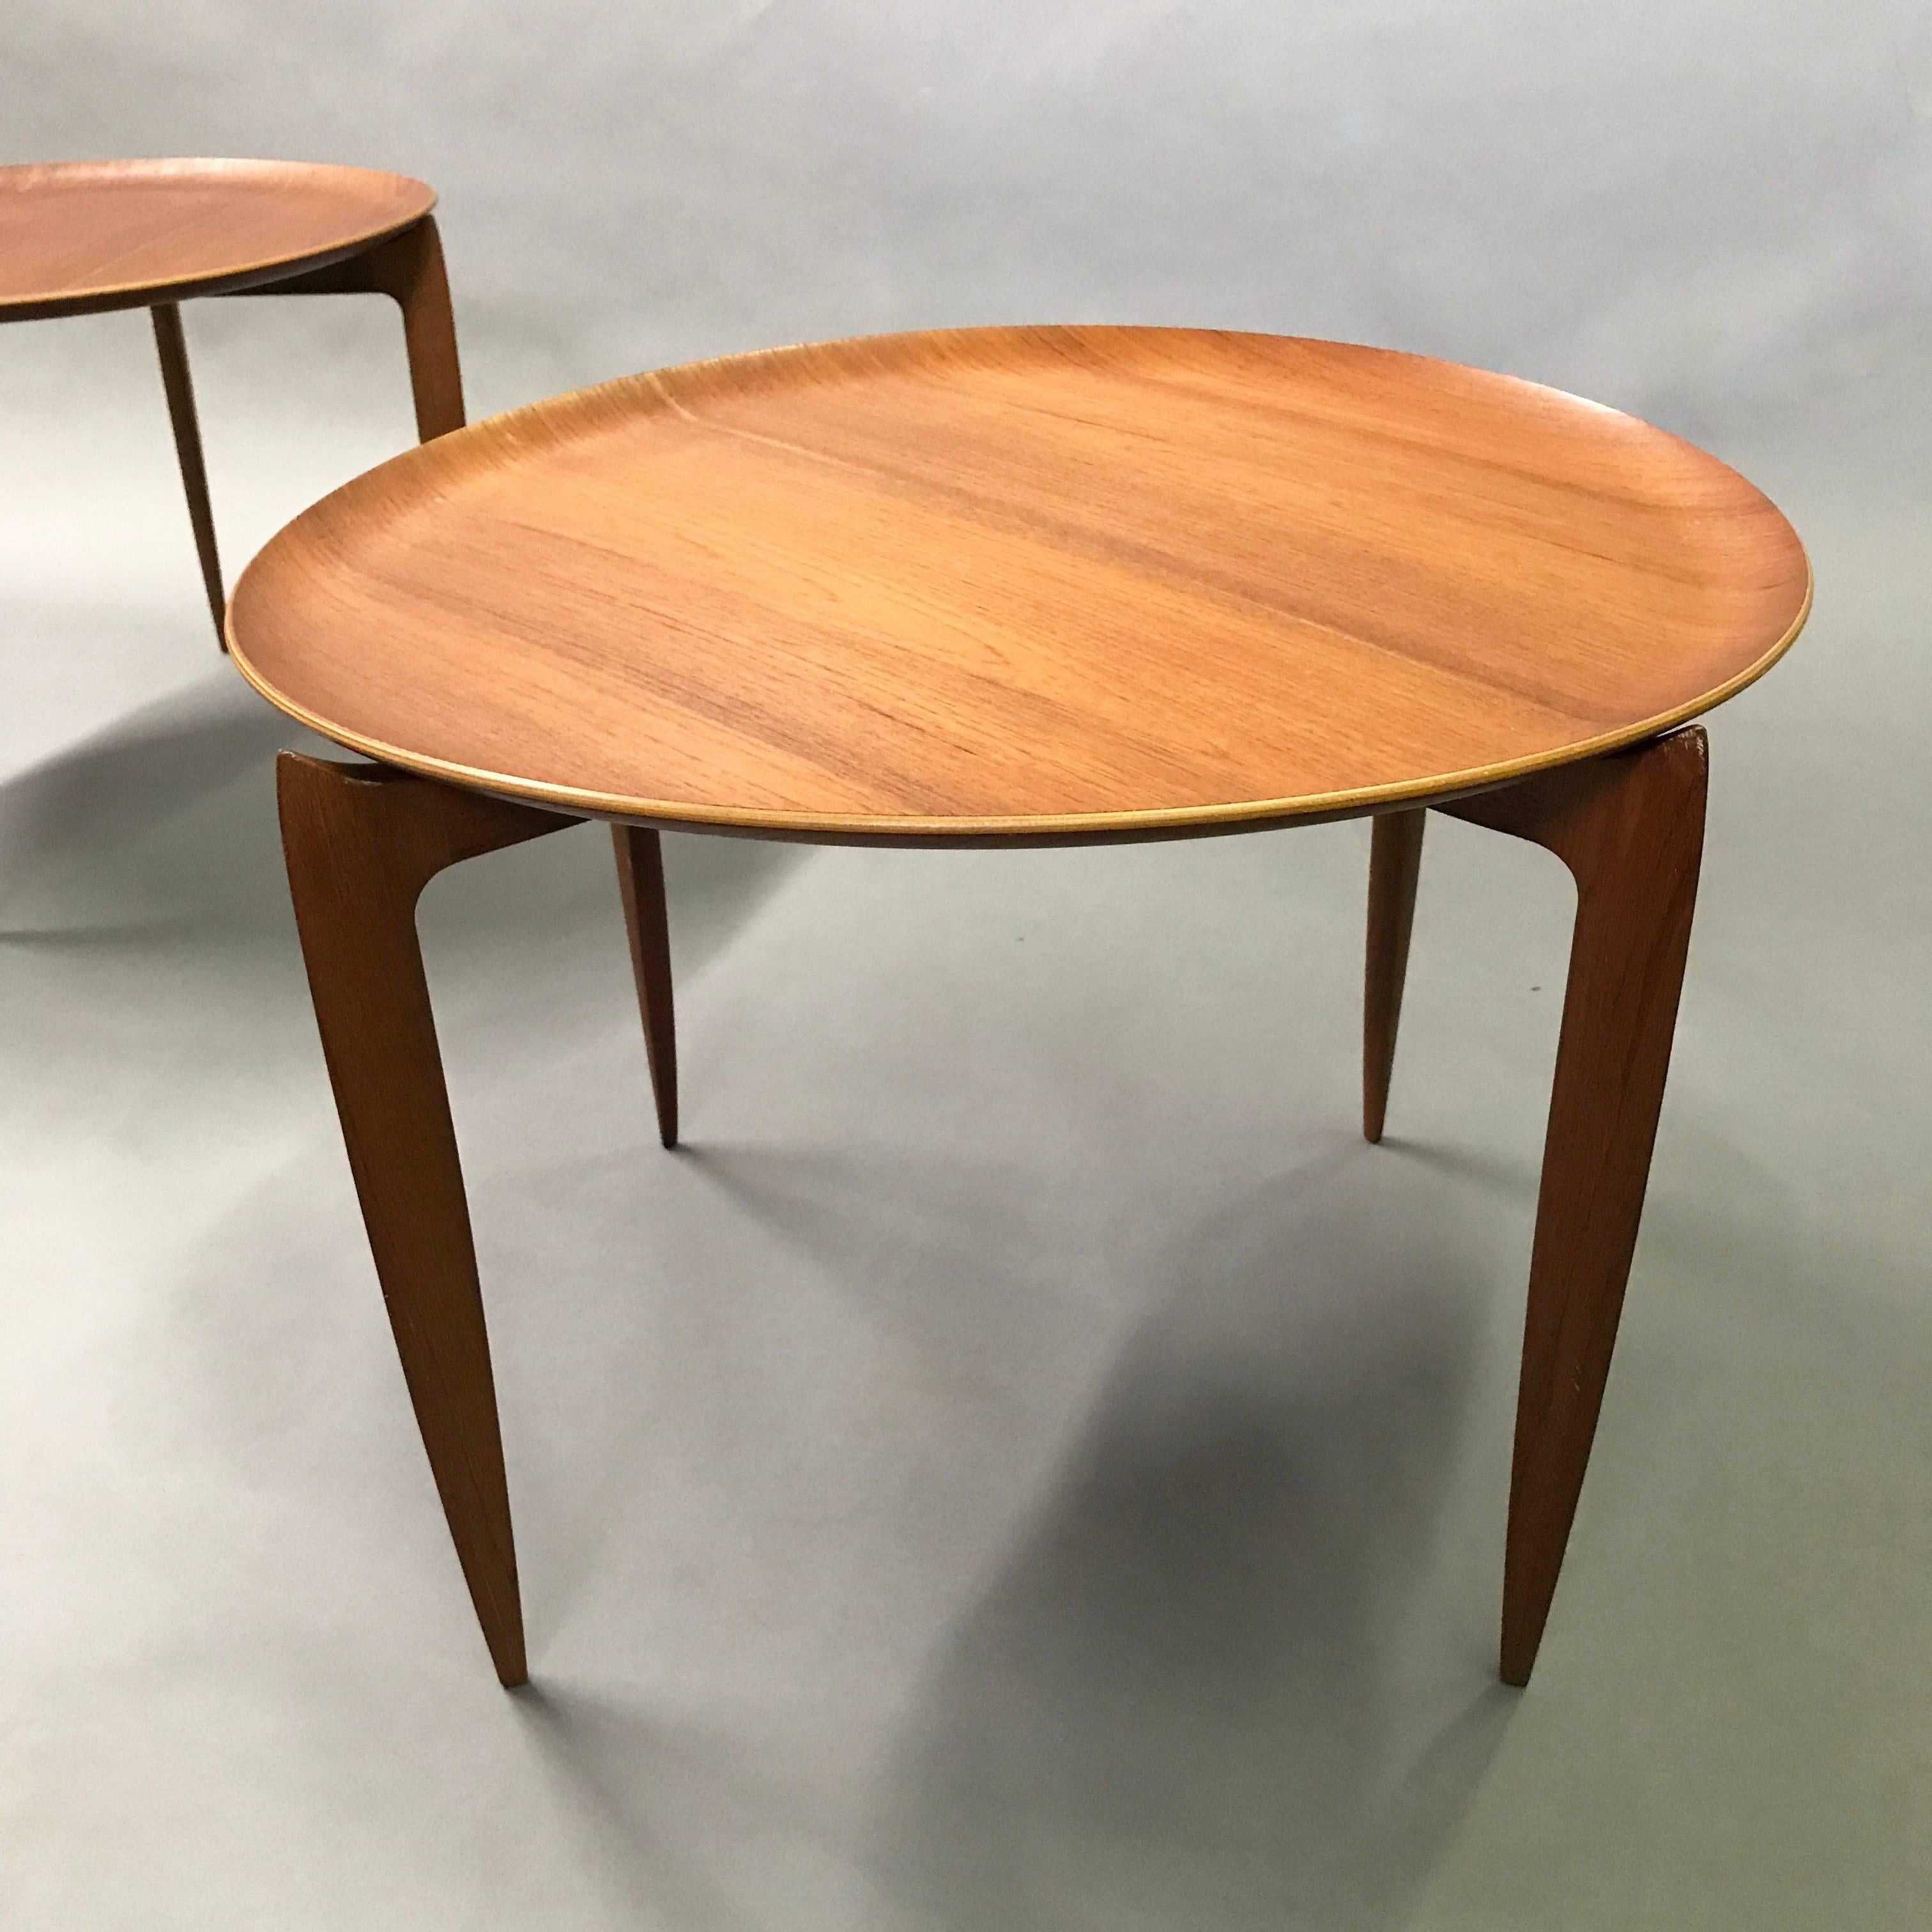 Mid-20th Century Danish Modern Teak Folding Tray Tables by Willumsen and Engholm for Fritz Hansen